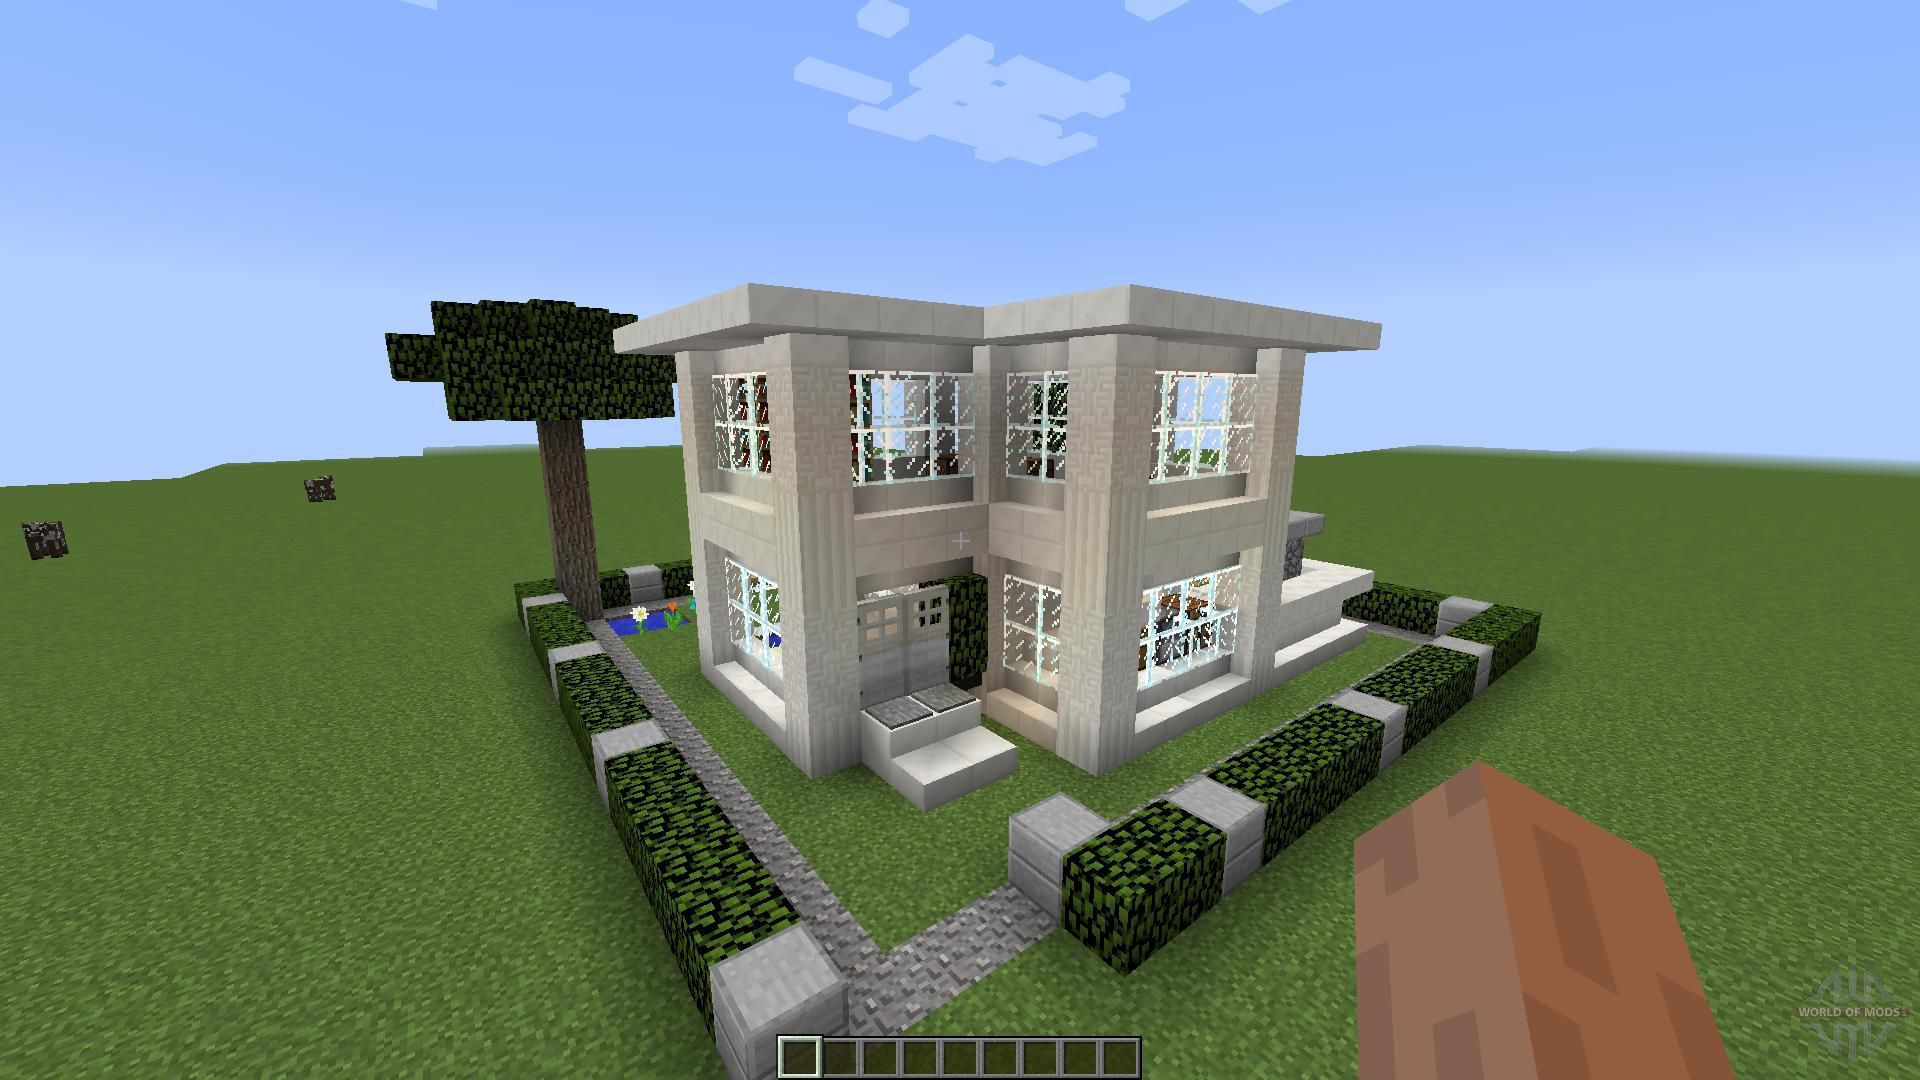 Maps for Minecraft Modern House [1.8][1.8.8] free download. Minecraft small modern house, Minecraft house designs, Small modern home